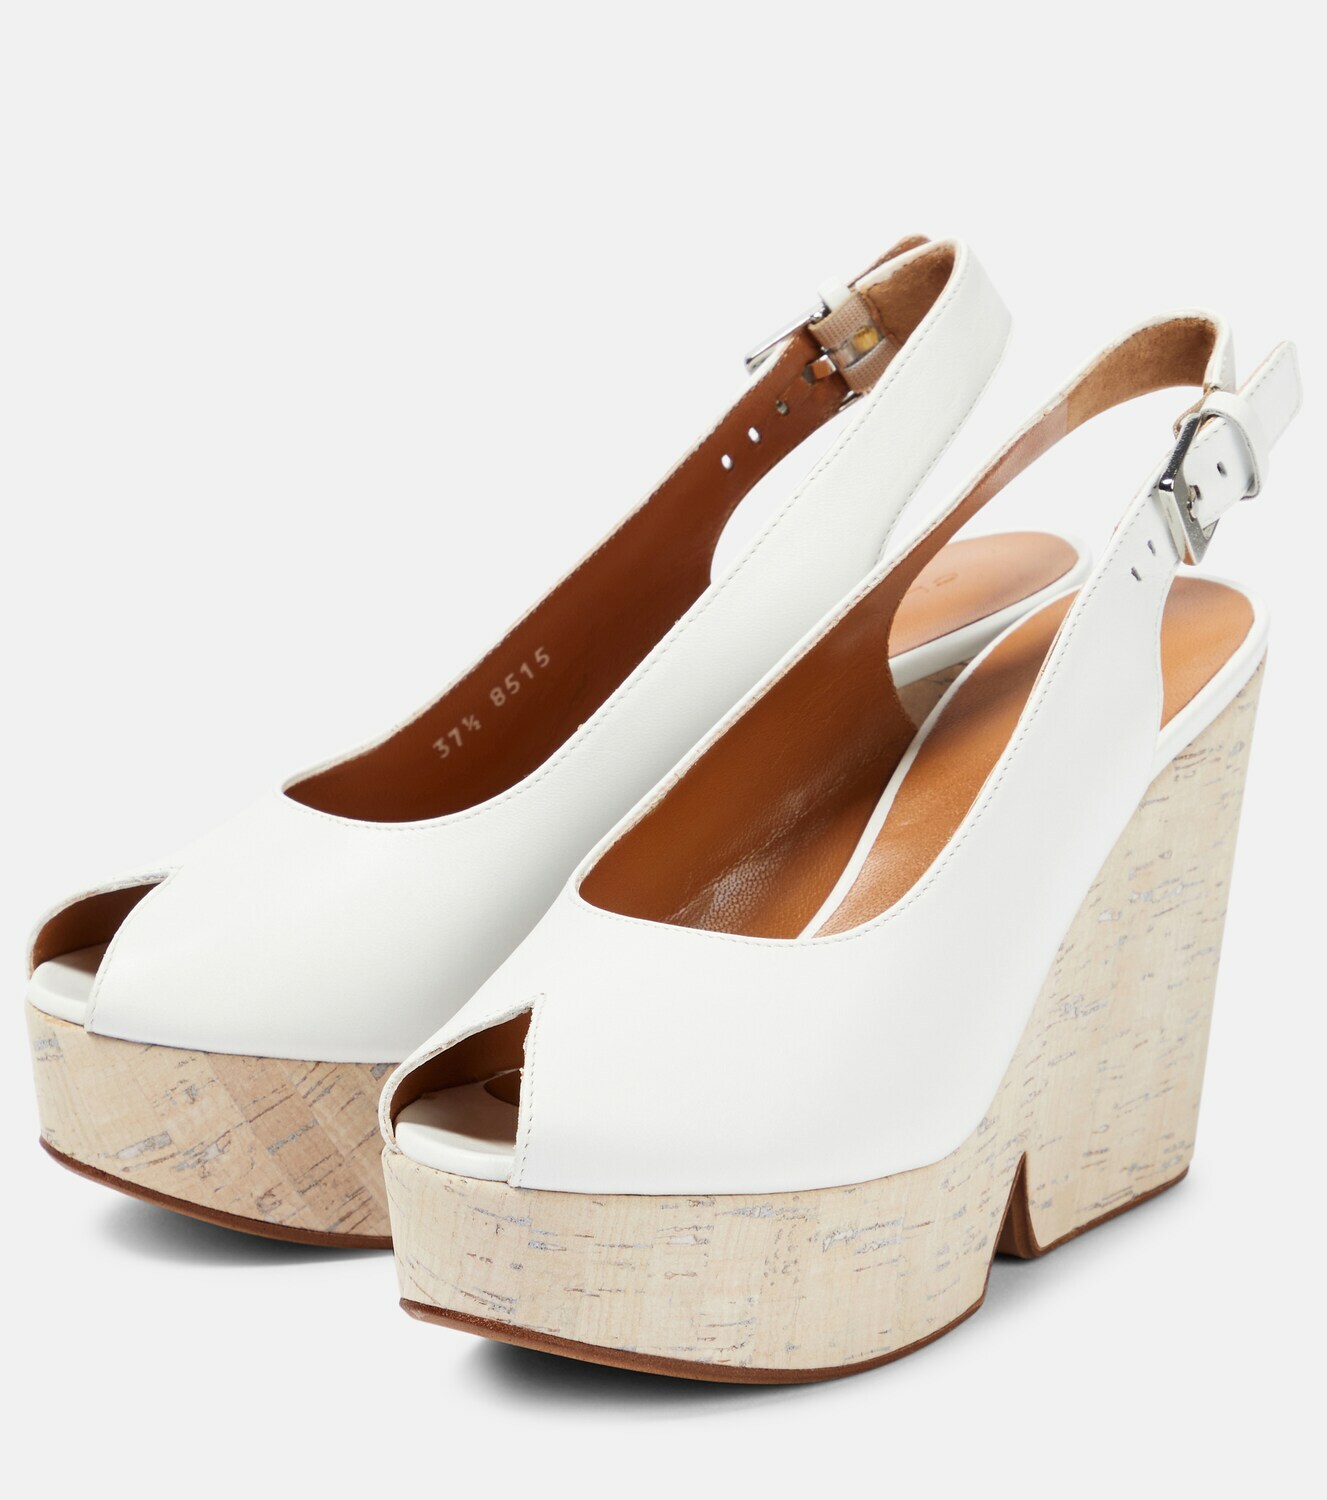 Clergerie - Dylan slingback wedge pumps Clergerie